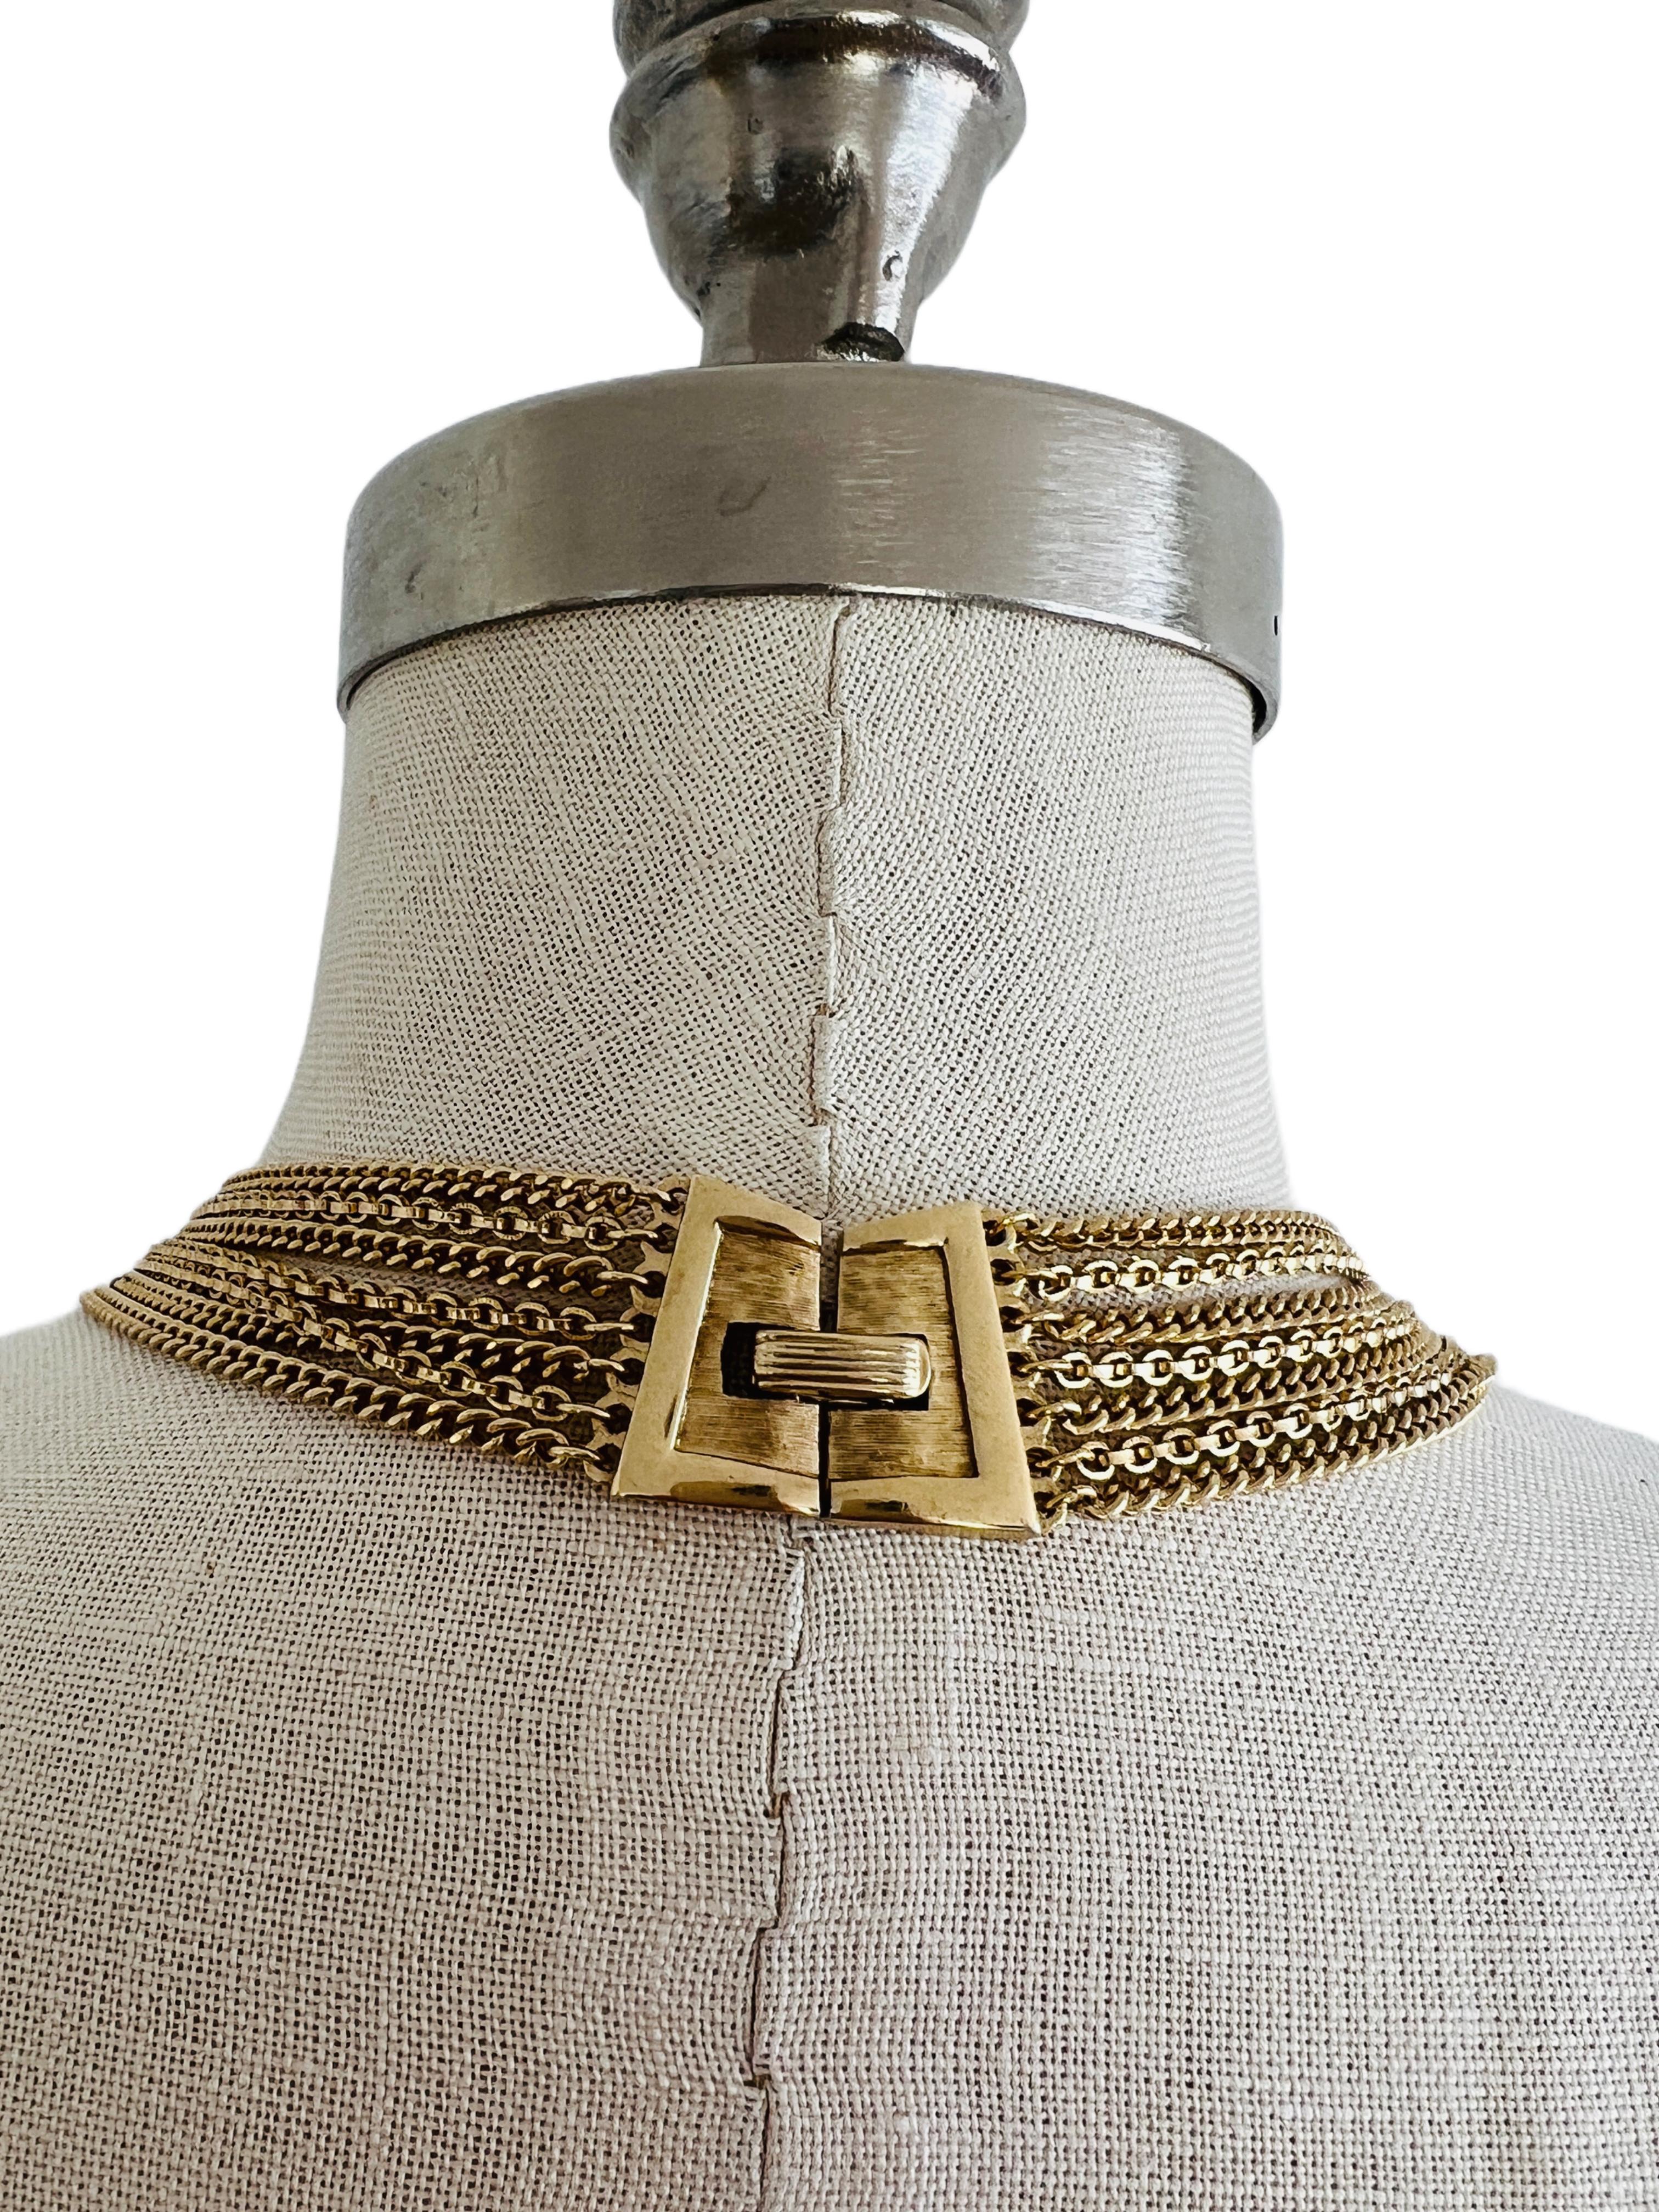 vintage crown trifari bright light weight gold bead and chain necklace